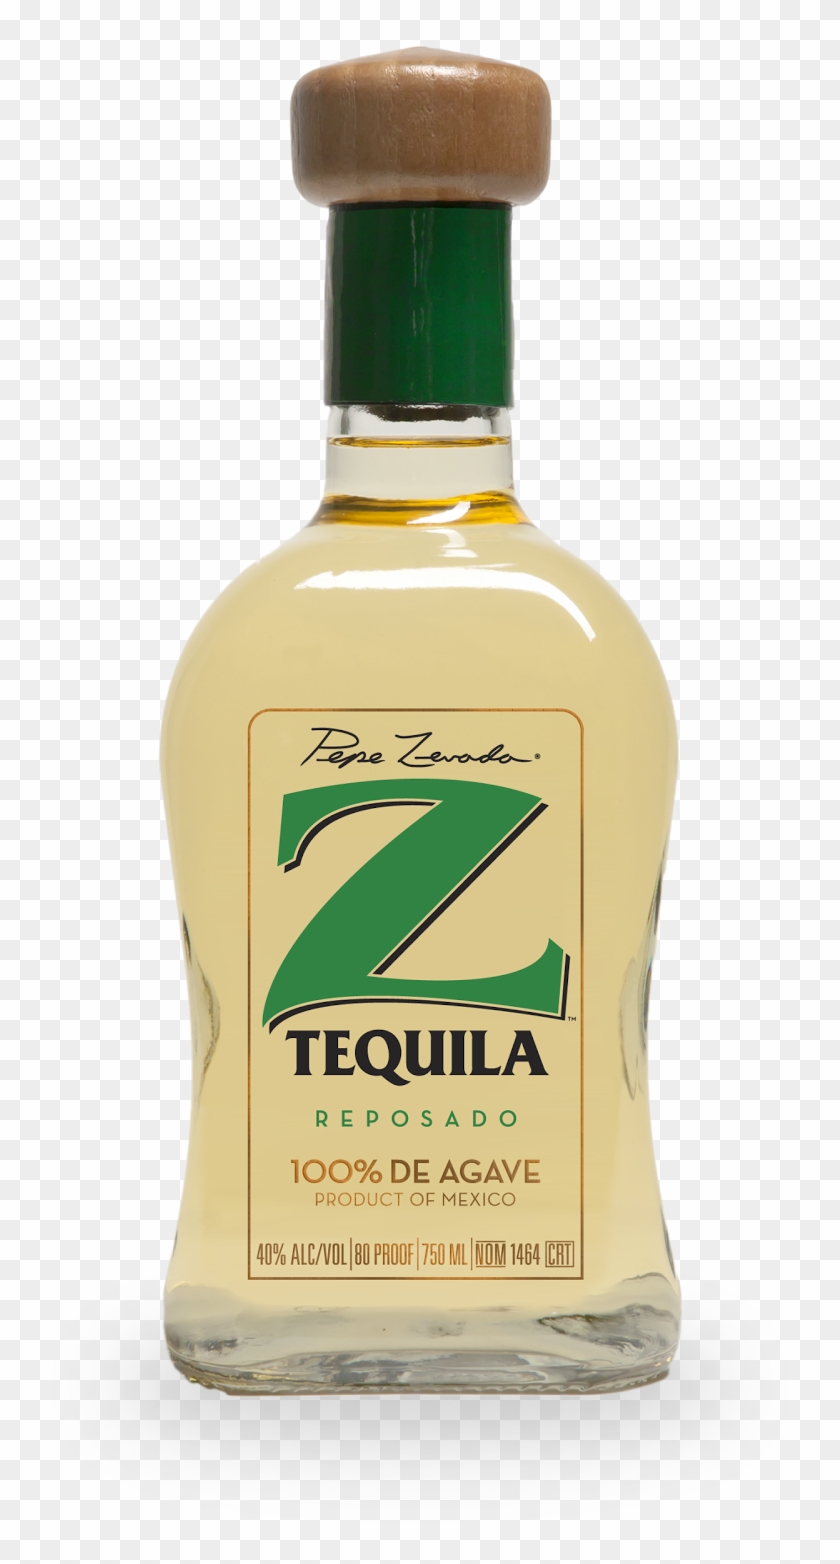 This Is The Last Of The Z Tequila Line For Me To Try - Z Tequila Clipart #4615433